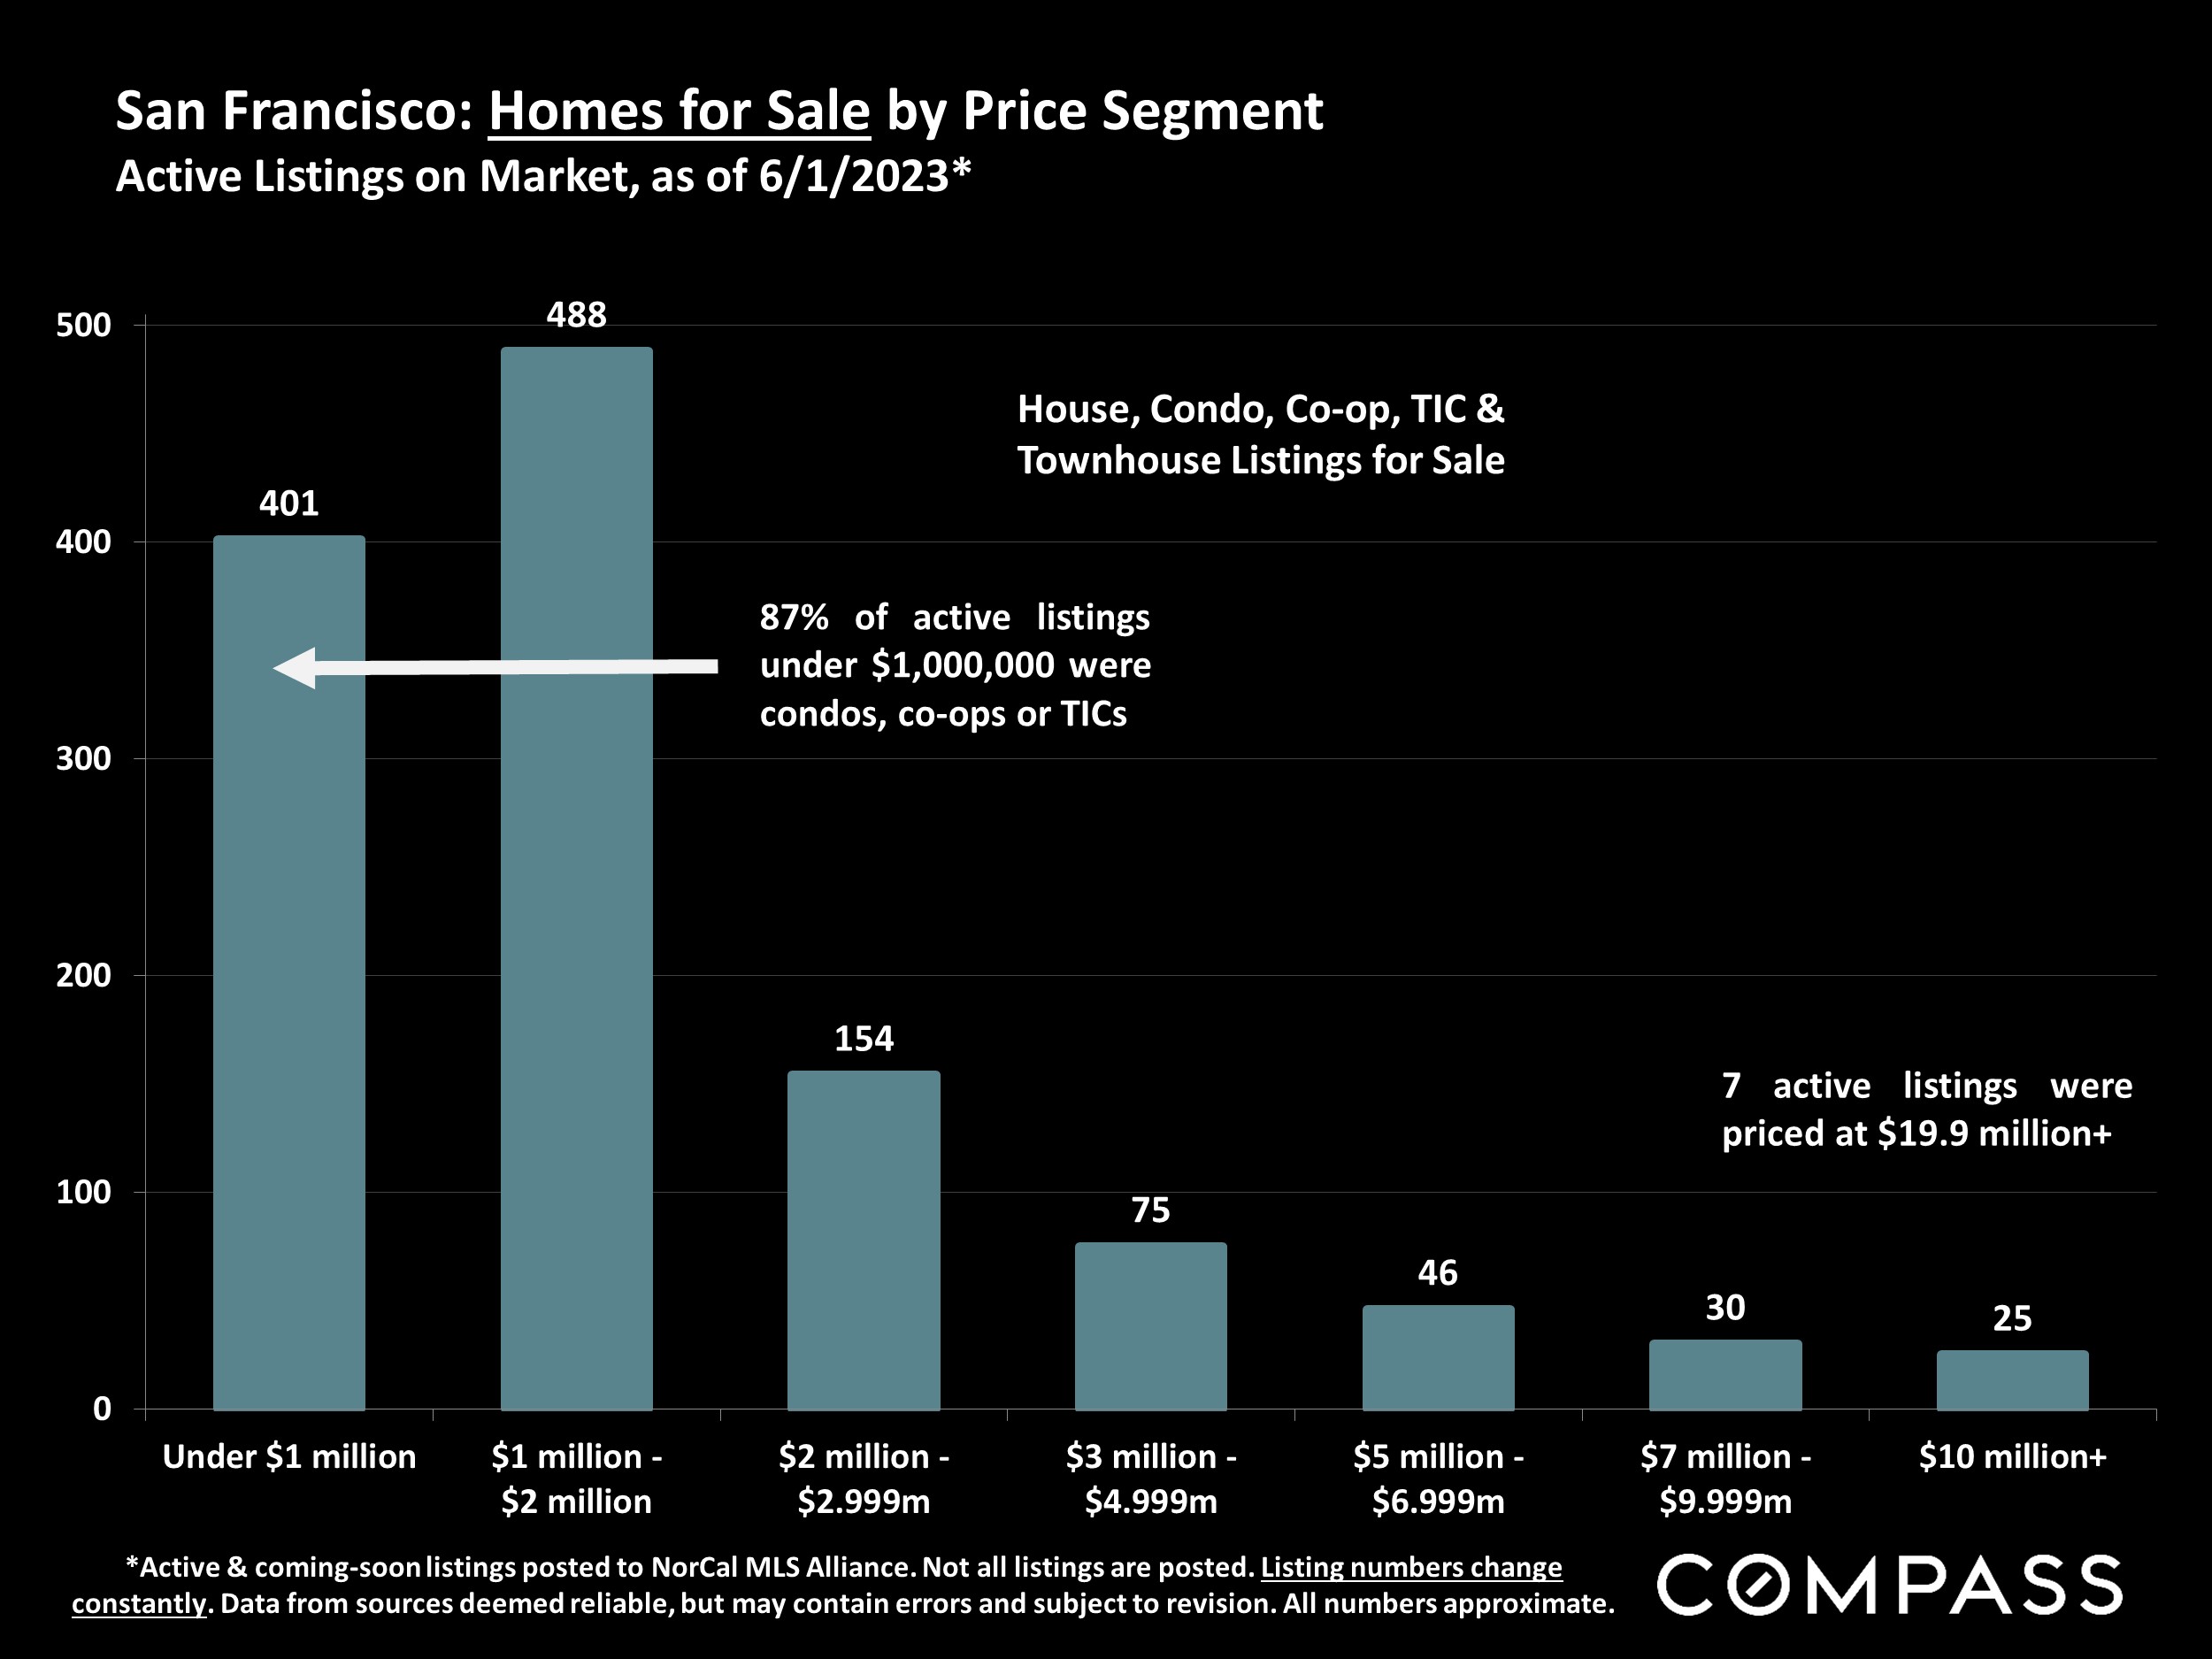 San Francisco: Homes for Sale by Price Segment